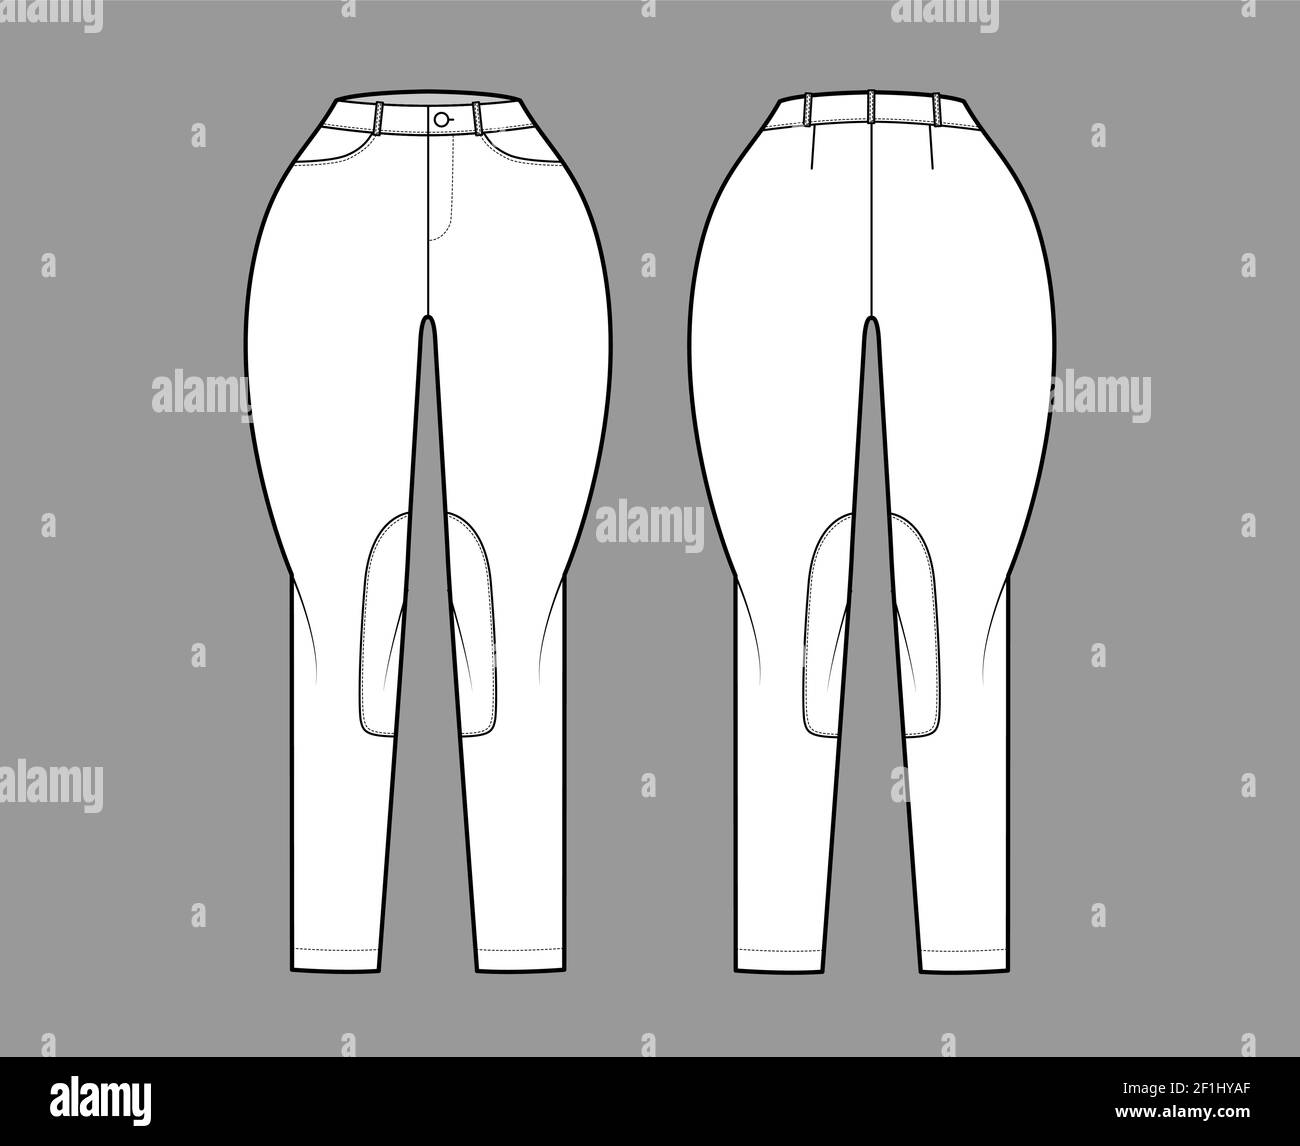 jeans classic jodhpurs denim pants technical fashion illustration with normal waist high rise pockets belt loops flat bottom apparel template front white grey color style women men unisex cad 2F1HYAF